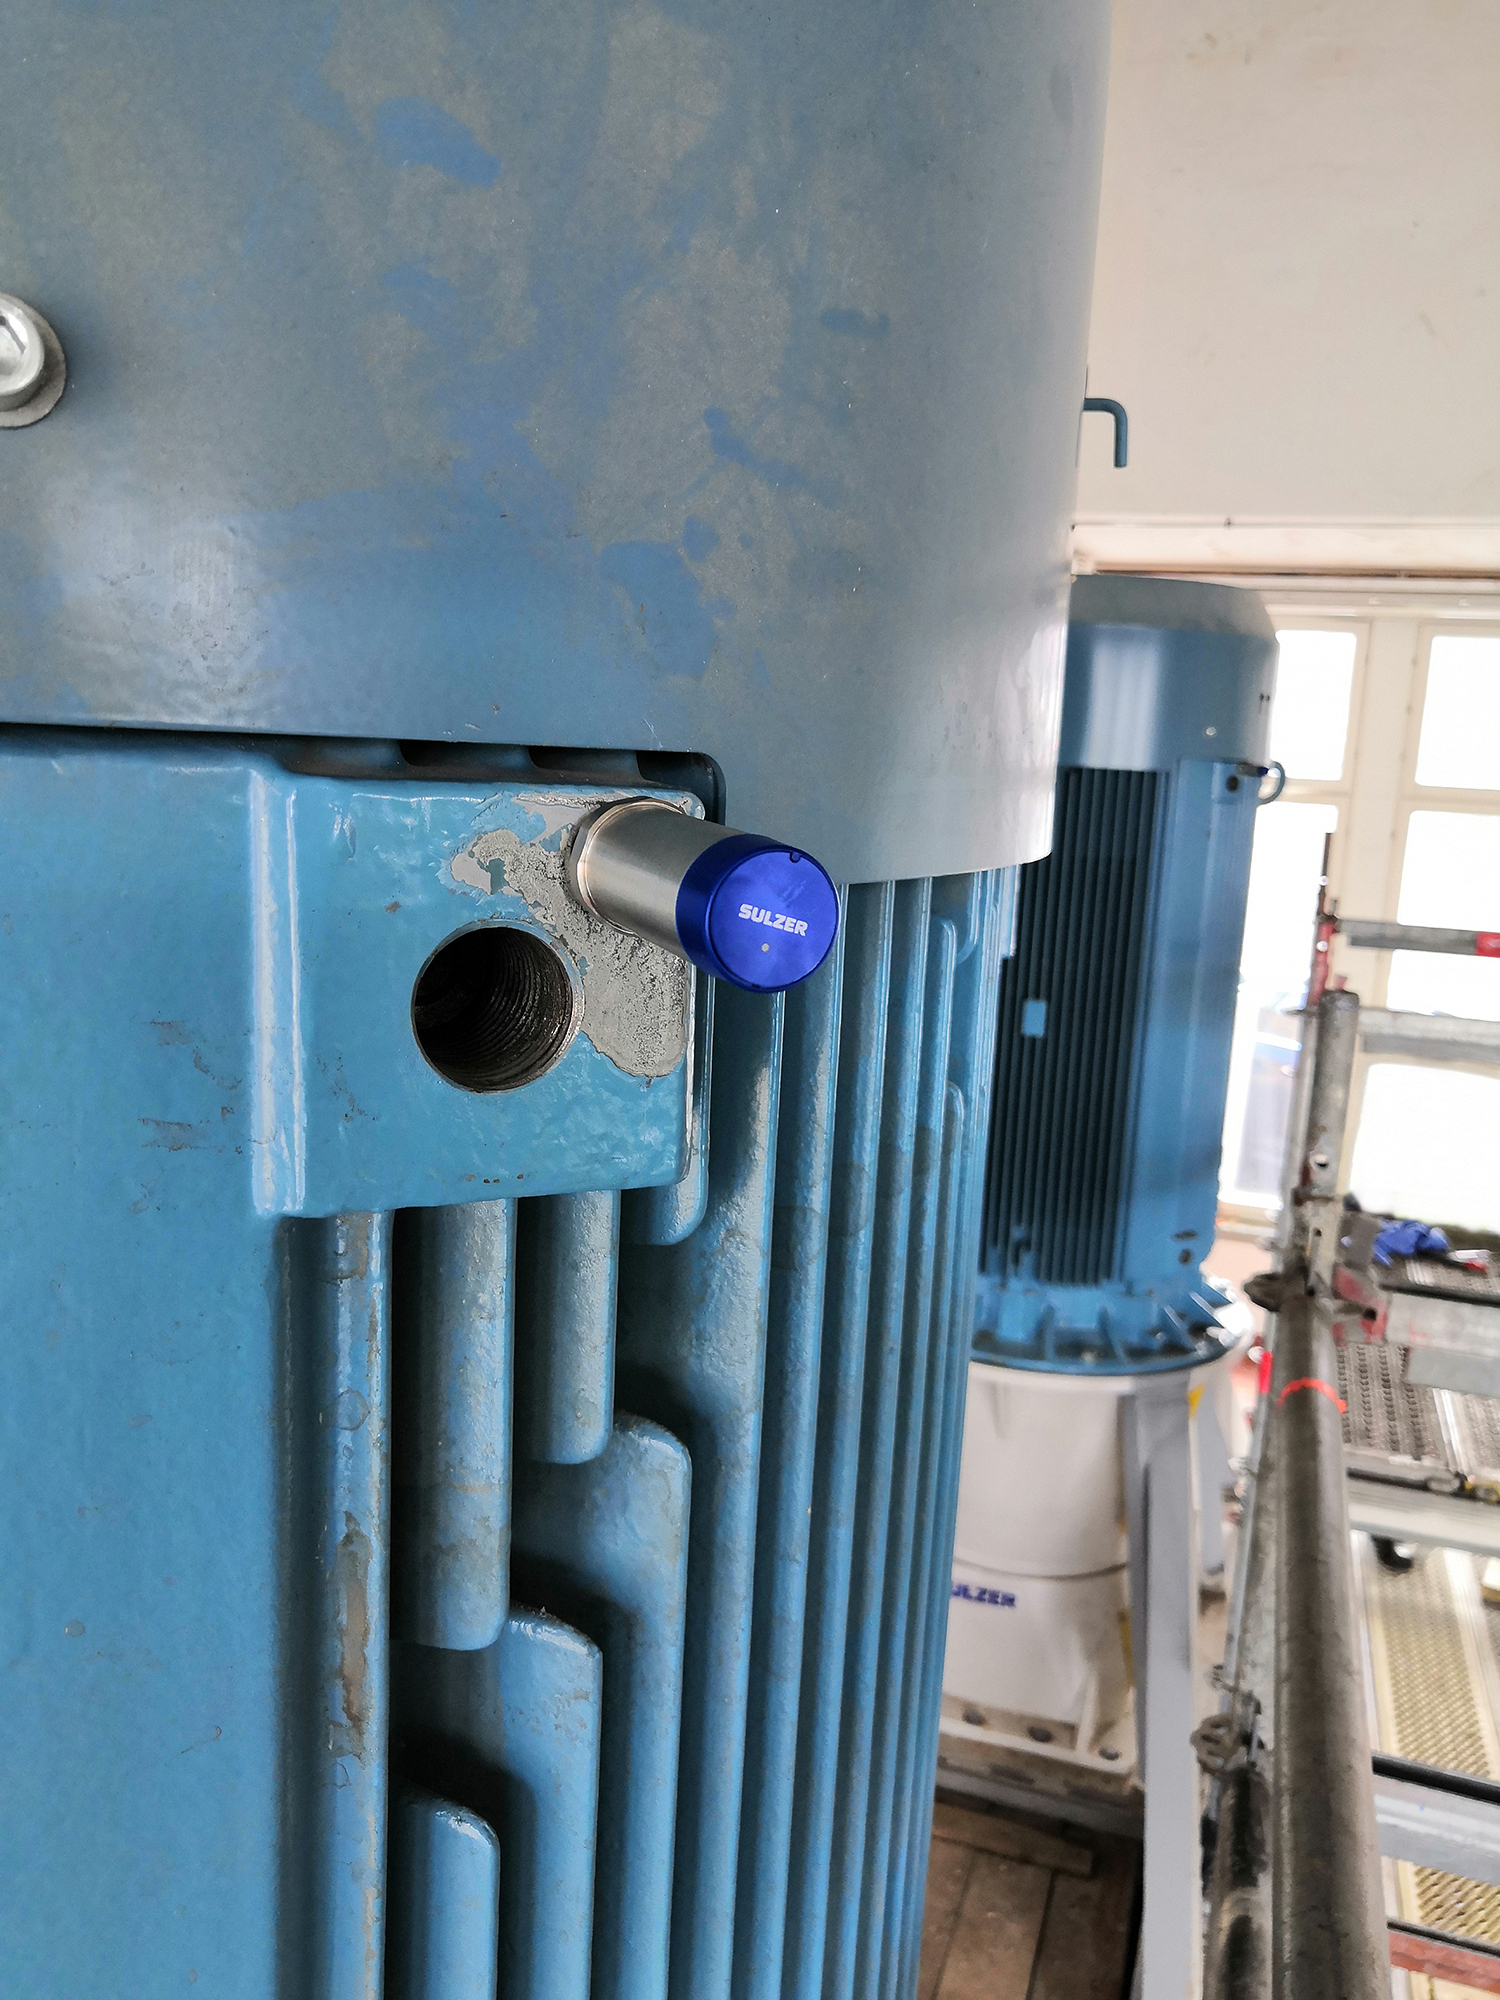 Sulzer Sense monitors the condition of two vertical pumps and motors.